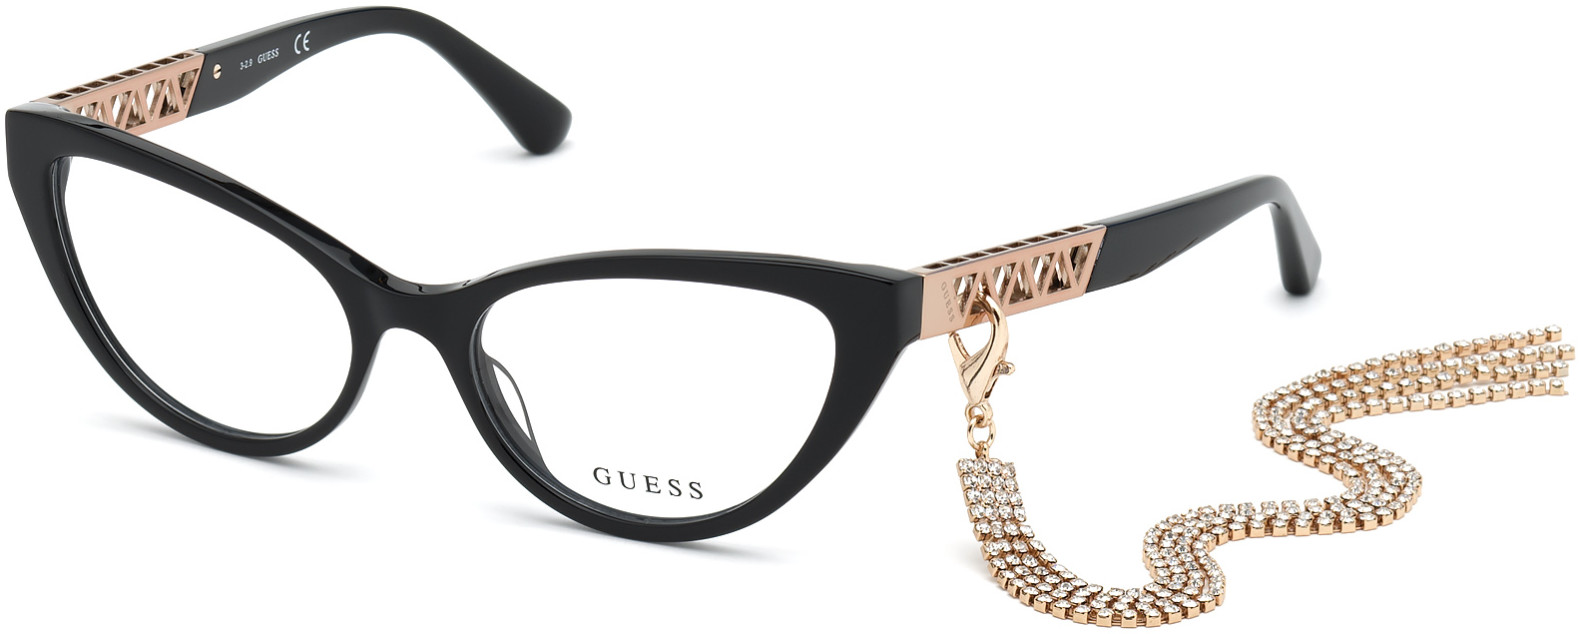 GUESS 2783 001